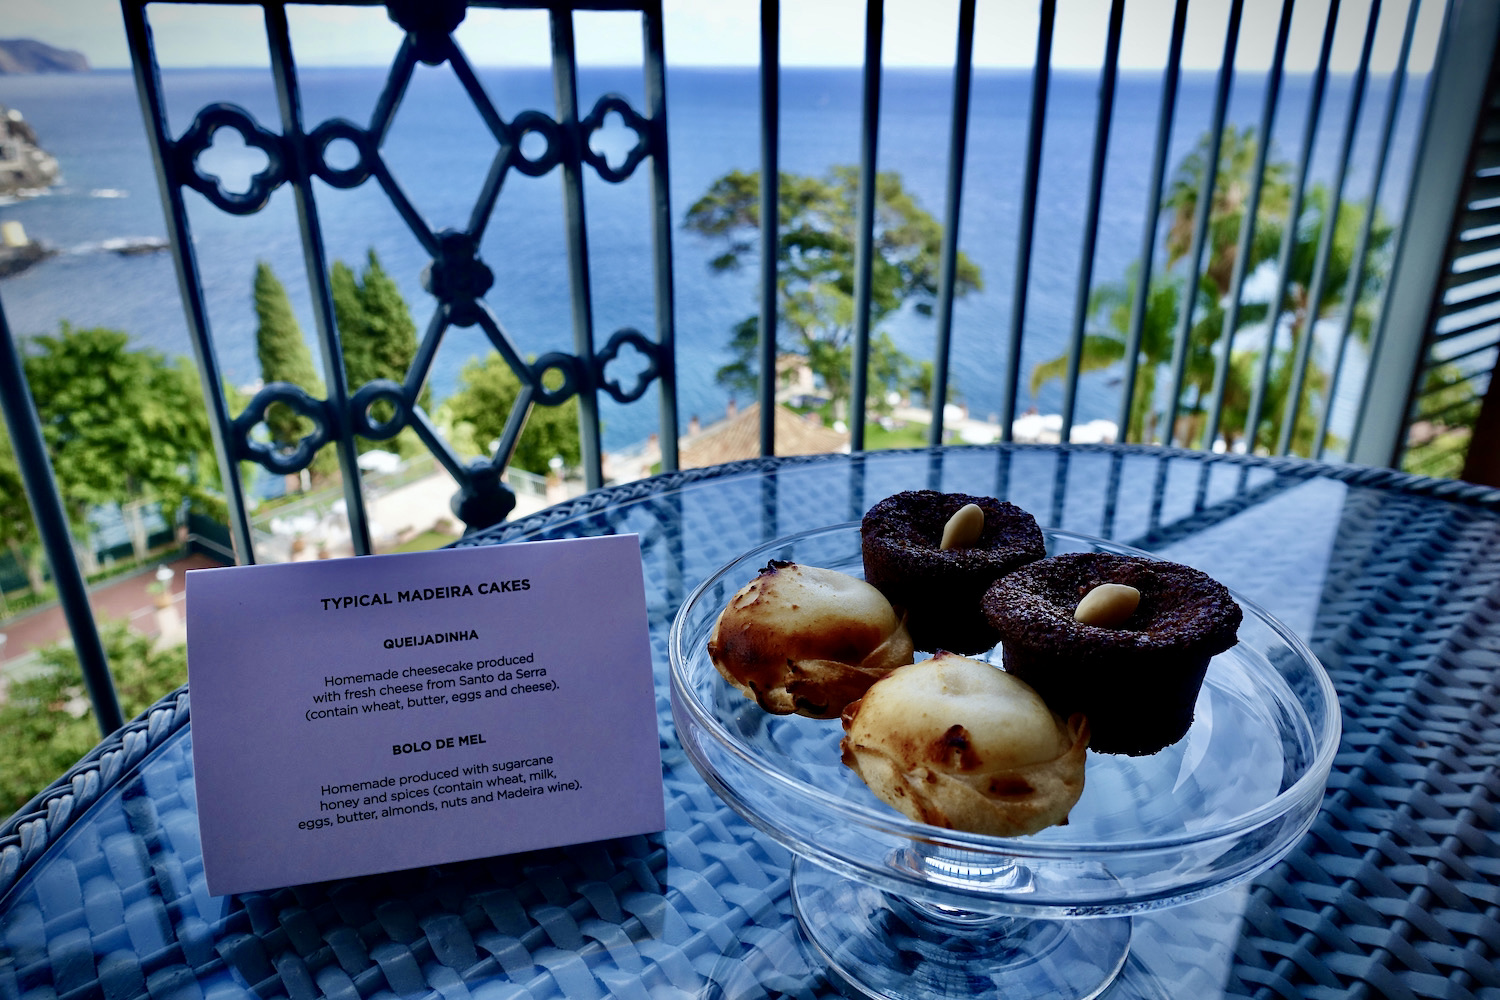 Madeiran sweets (compliments of the Reid's Palace Madeira)